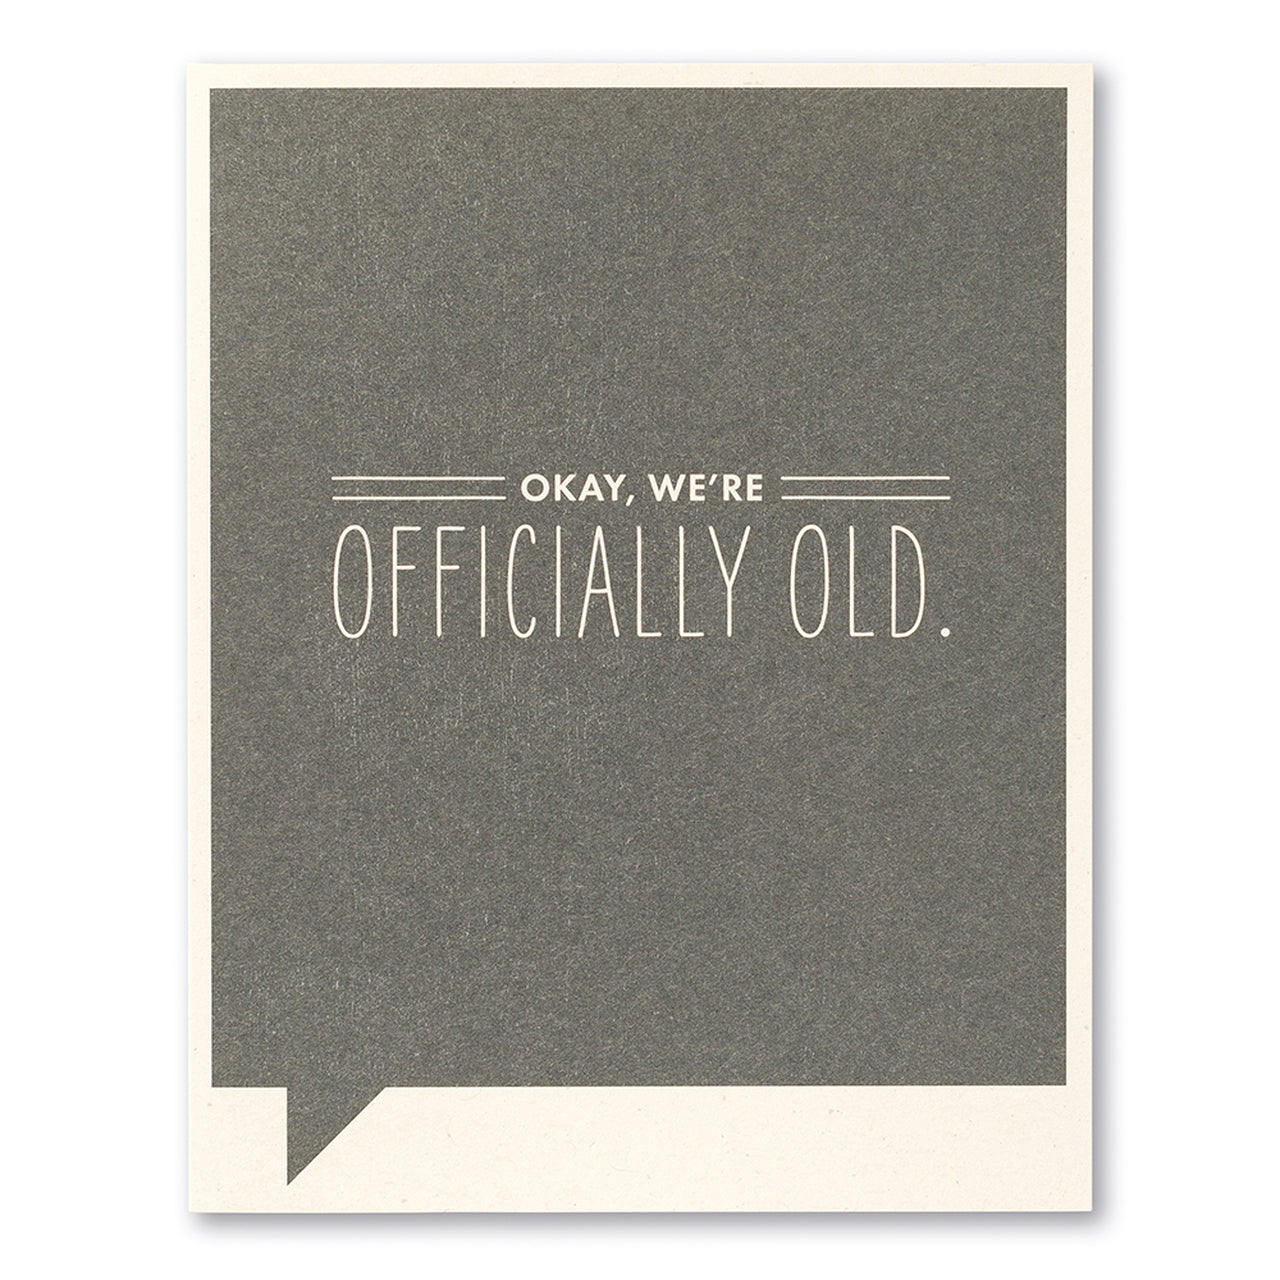 Frank and Funny Greeting Card - Birthday -  Okay, we're officially old. - Mellow Monkey